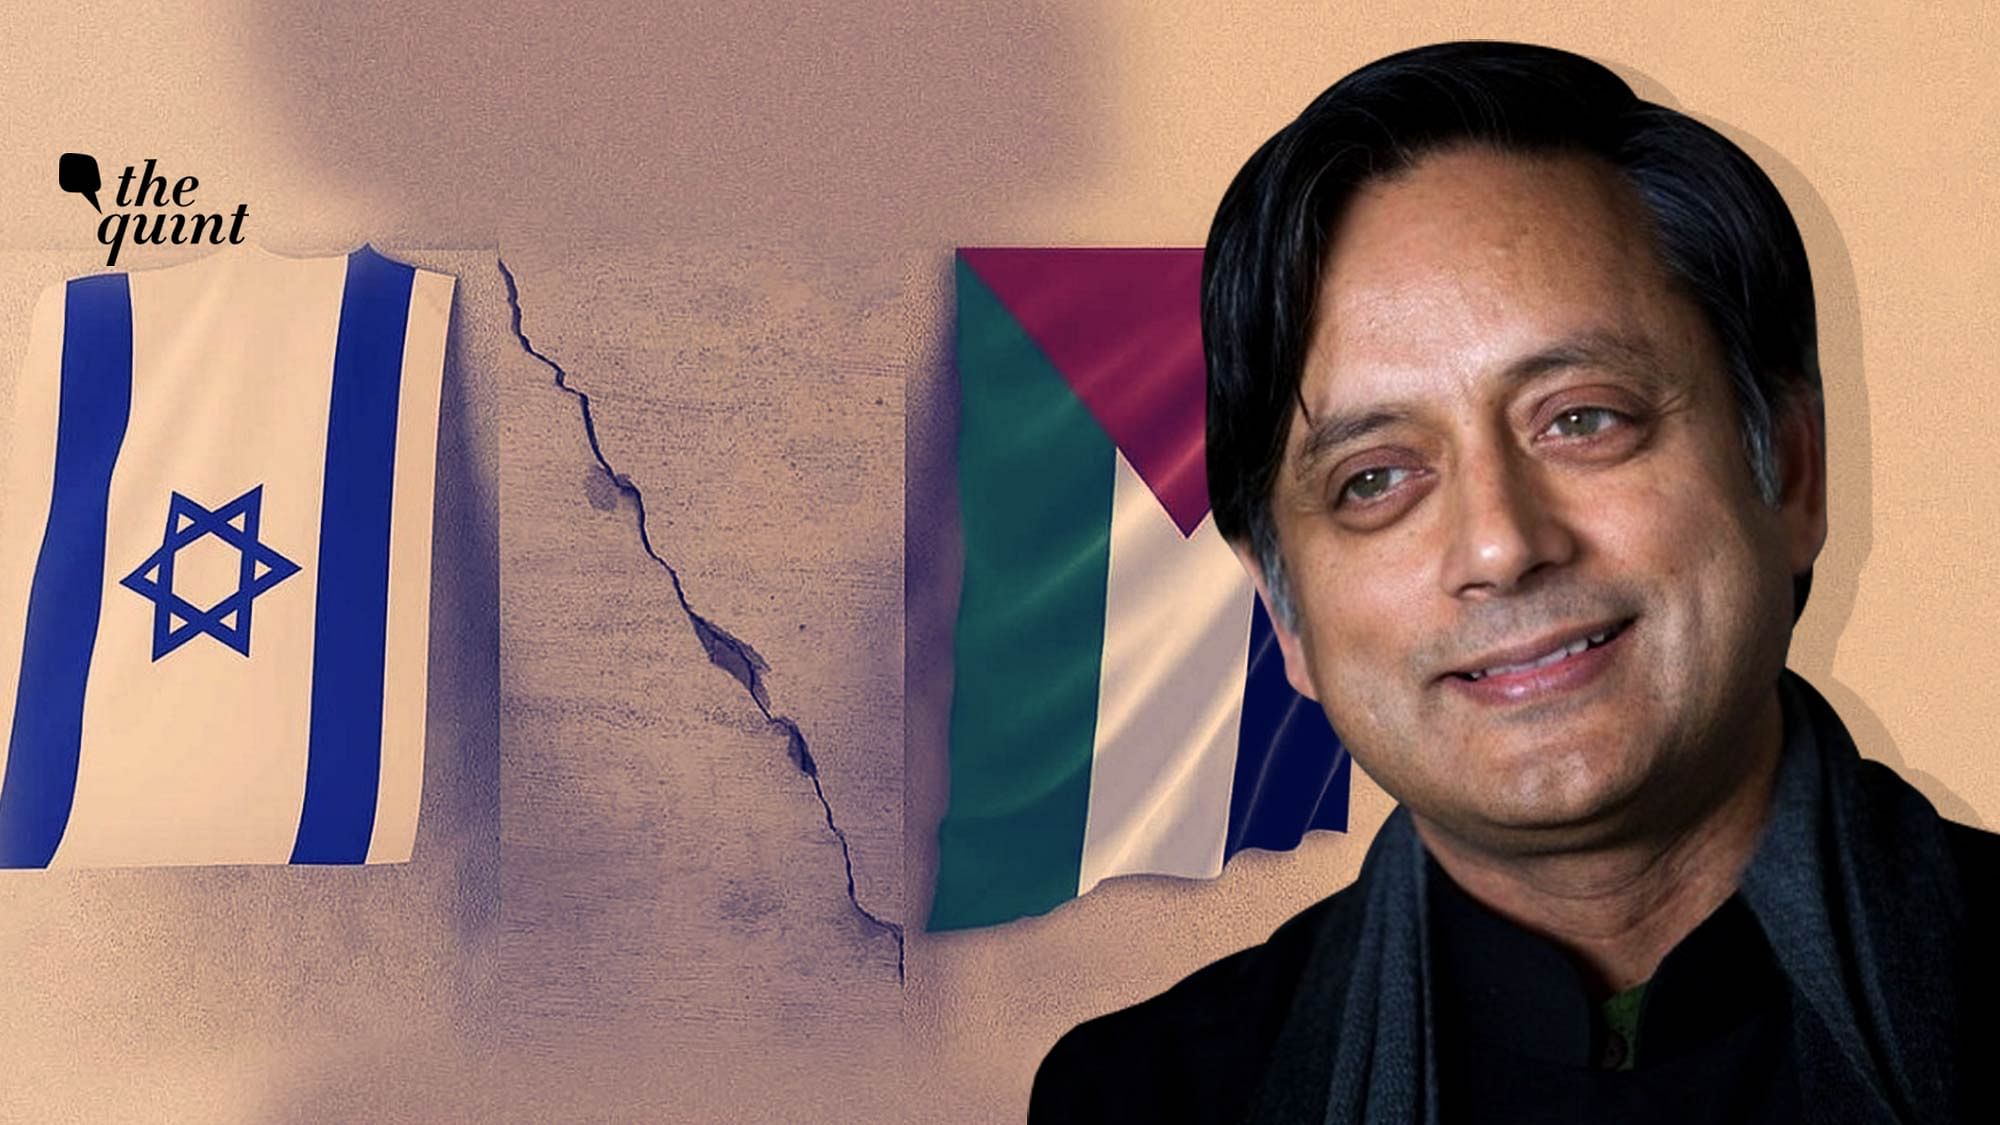 Image of Dr Shashi Tharoor, the author of this op-ed, in the foreground, and flags of Israel &amp; Palestine in the background, used for representational purposes.